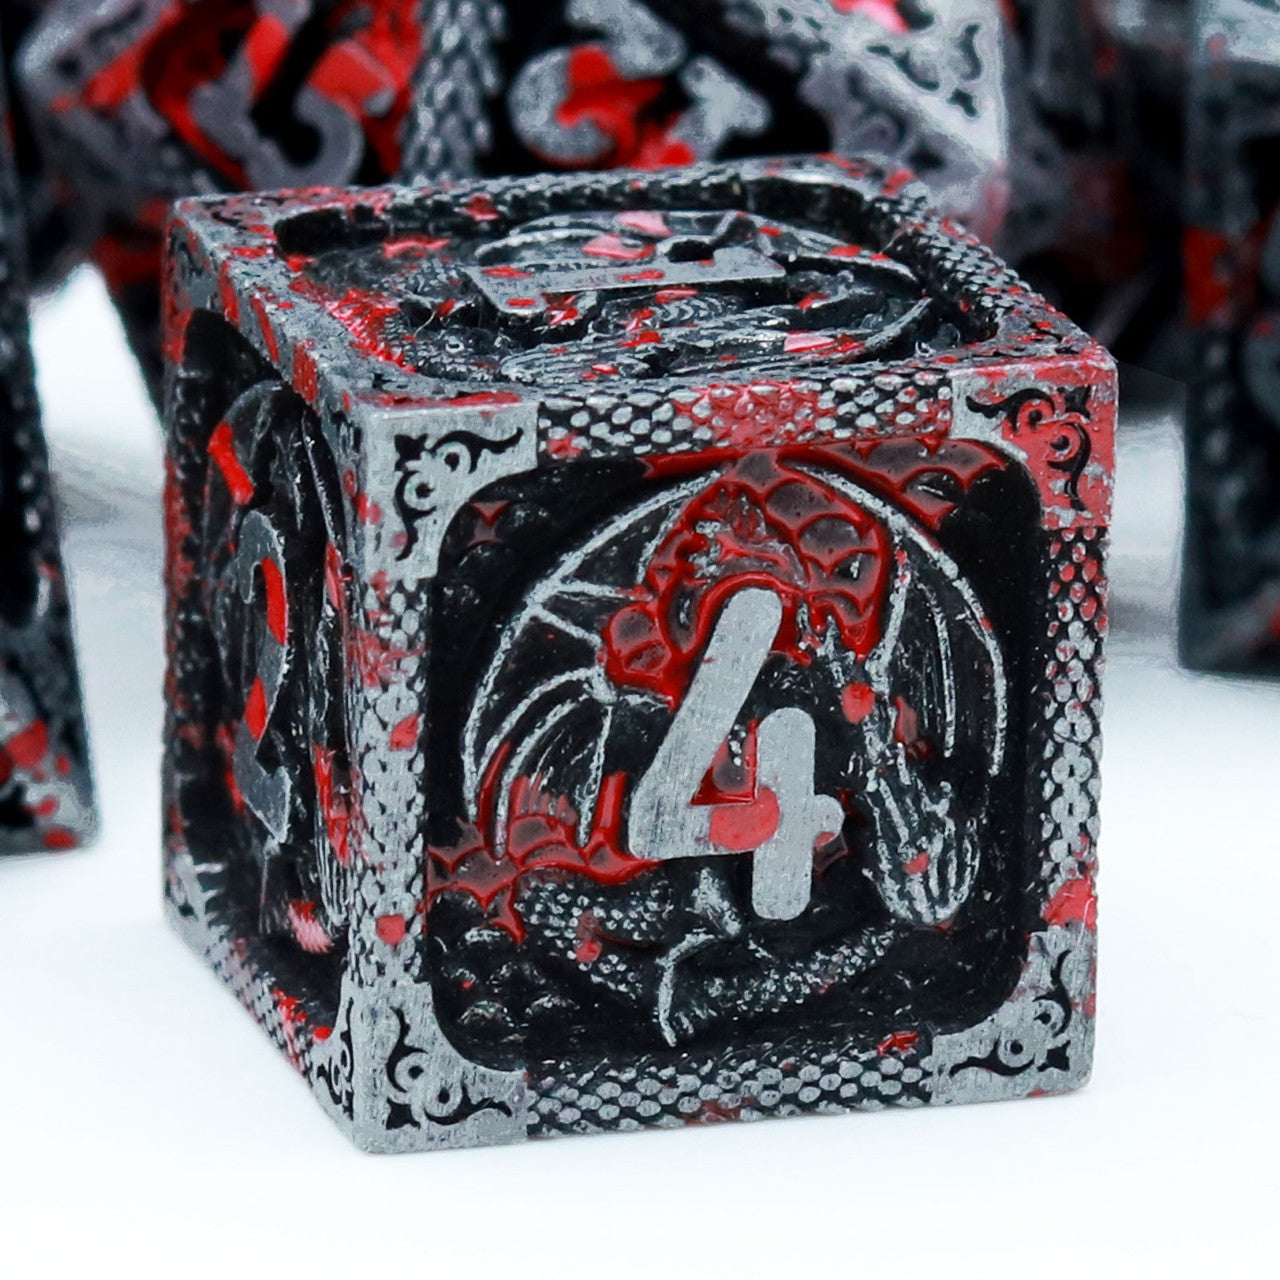 bloodstained metal dnd dice set dragon pattern